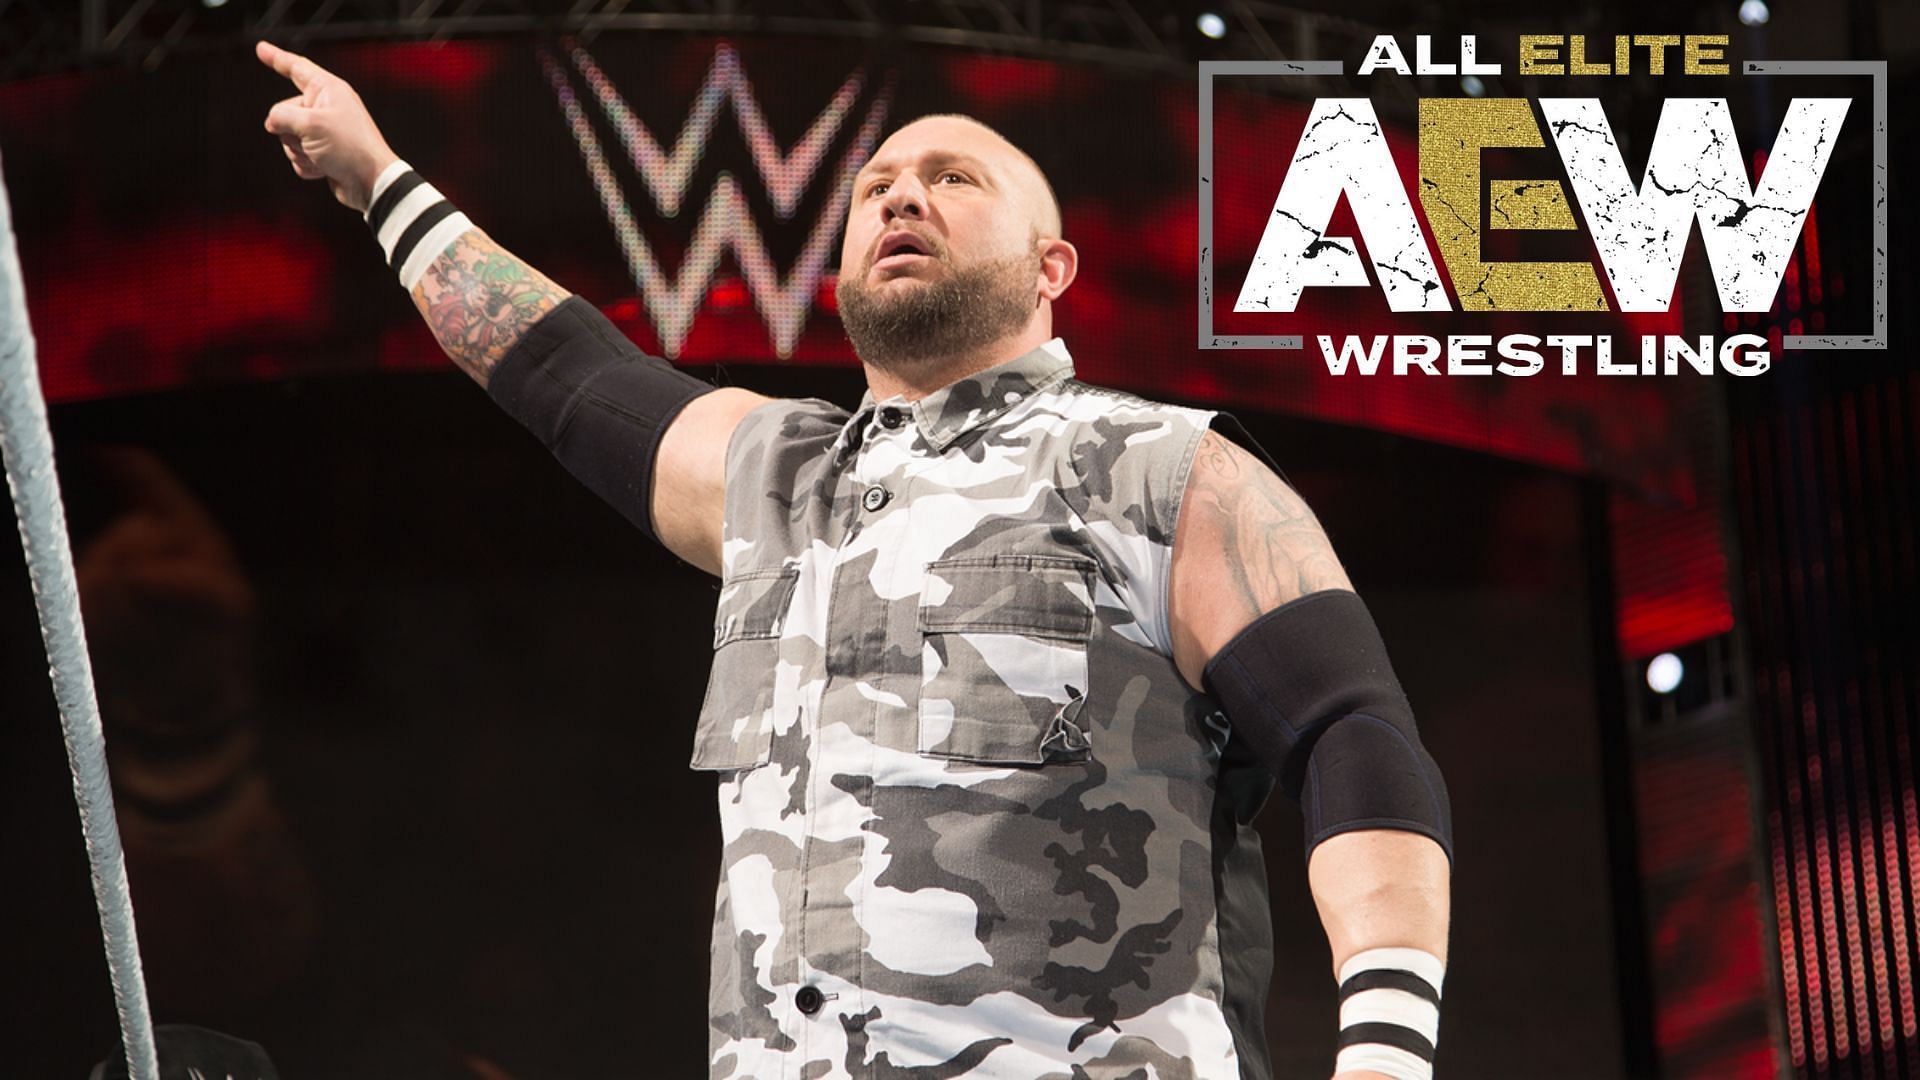 Bully ray had some harsh words for an AEW star this week